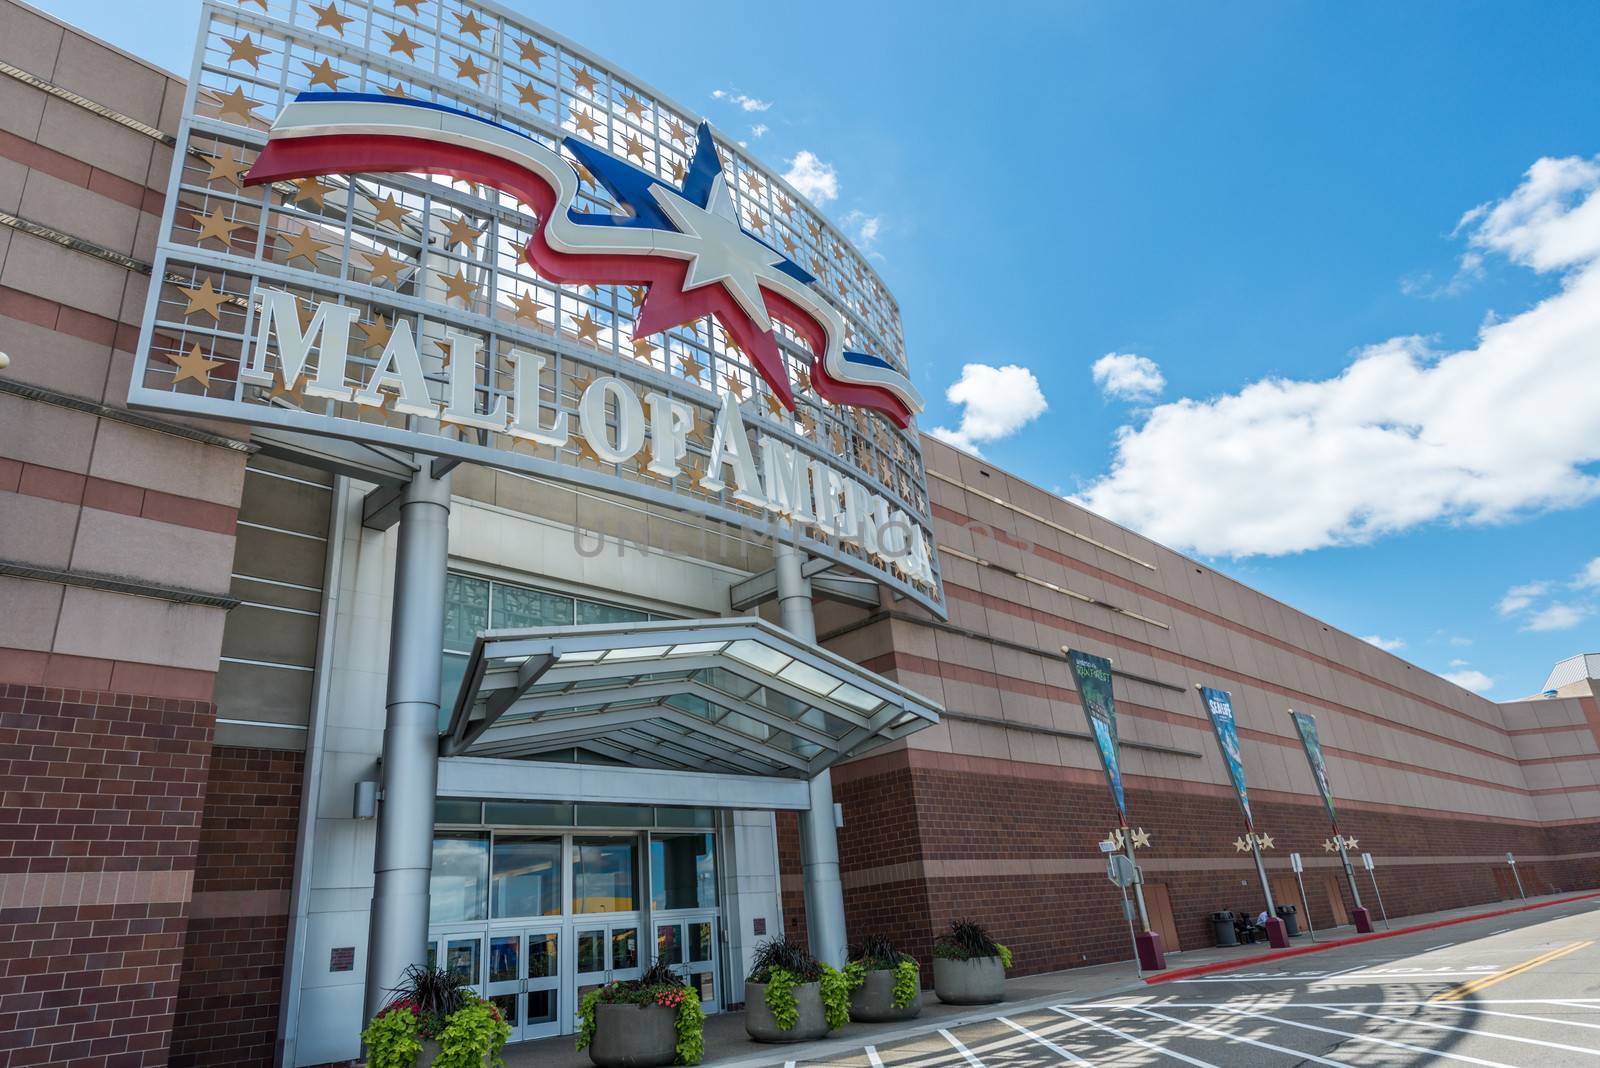 MINNEAPOLIS, MN - JULY 28: Mall of America main entrance, on July 28, 2013, in Minneapolis, MN. 